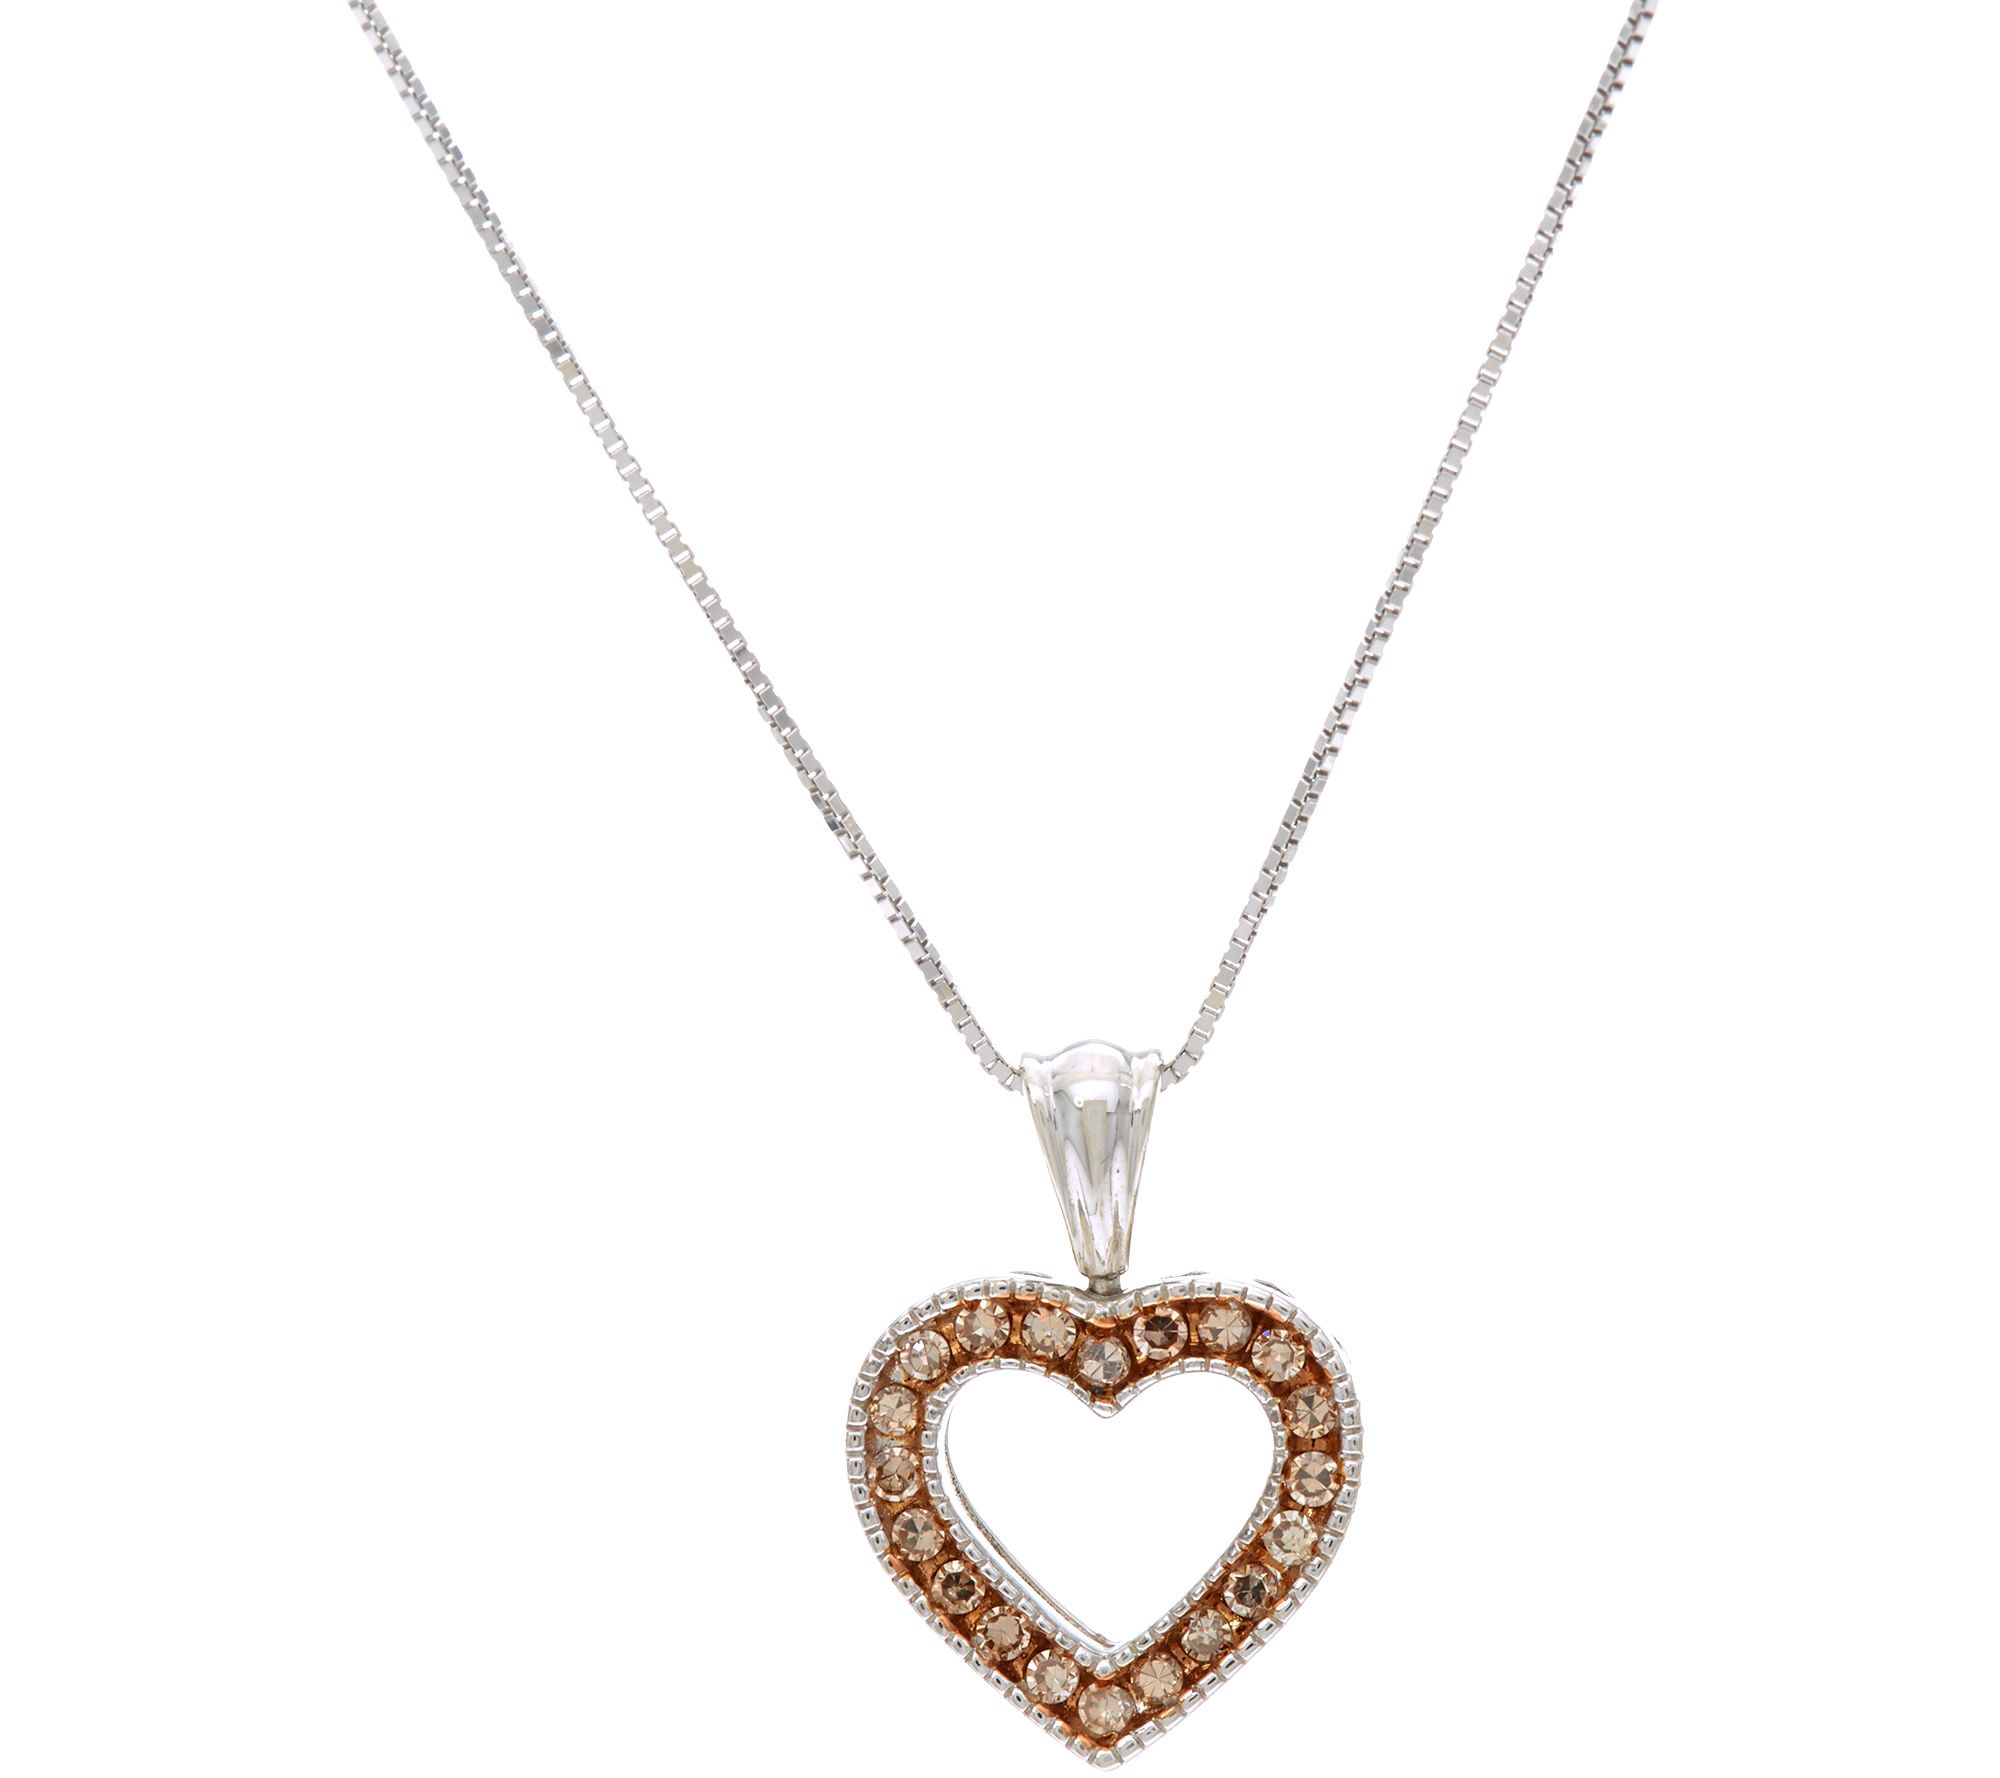 Colored Diamond Heart Pendant on Chain, Sterling, by Affinity - QVC.com